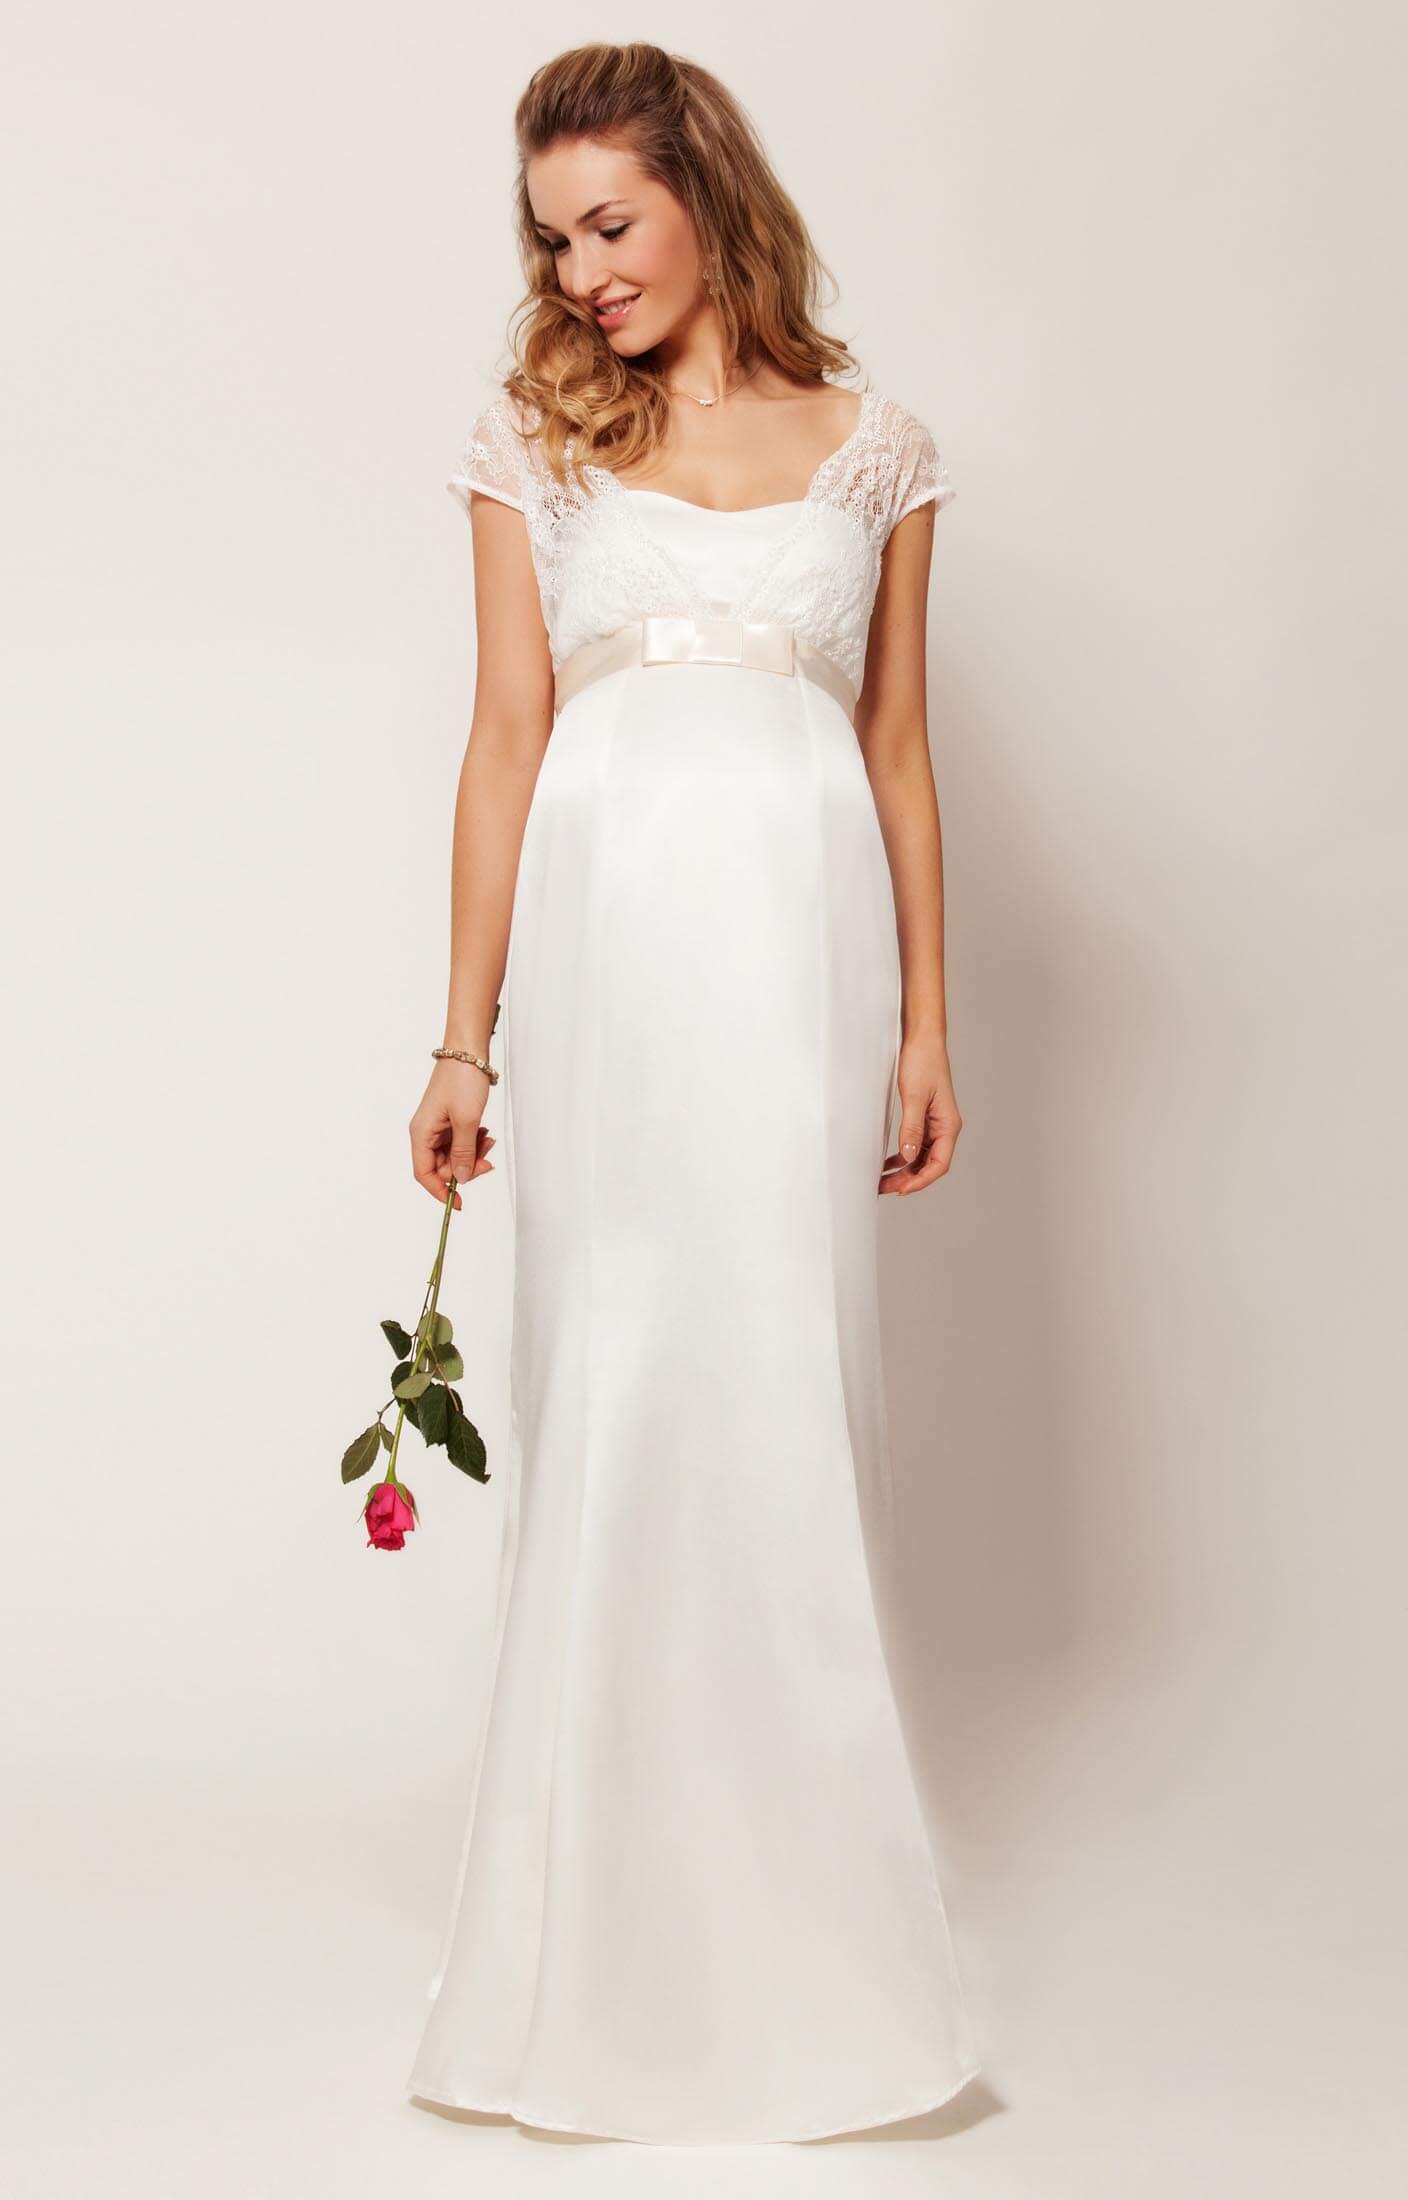 Top Maternity Wedding Dresses in the world The ultimate guide 